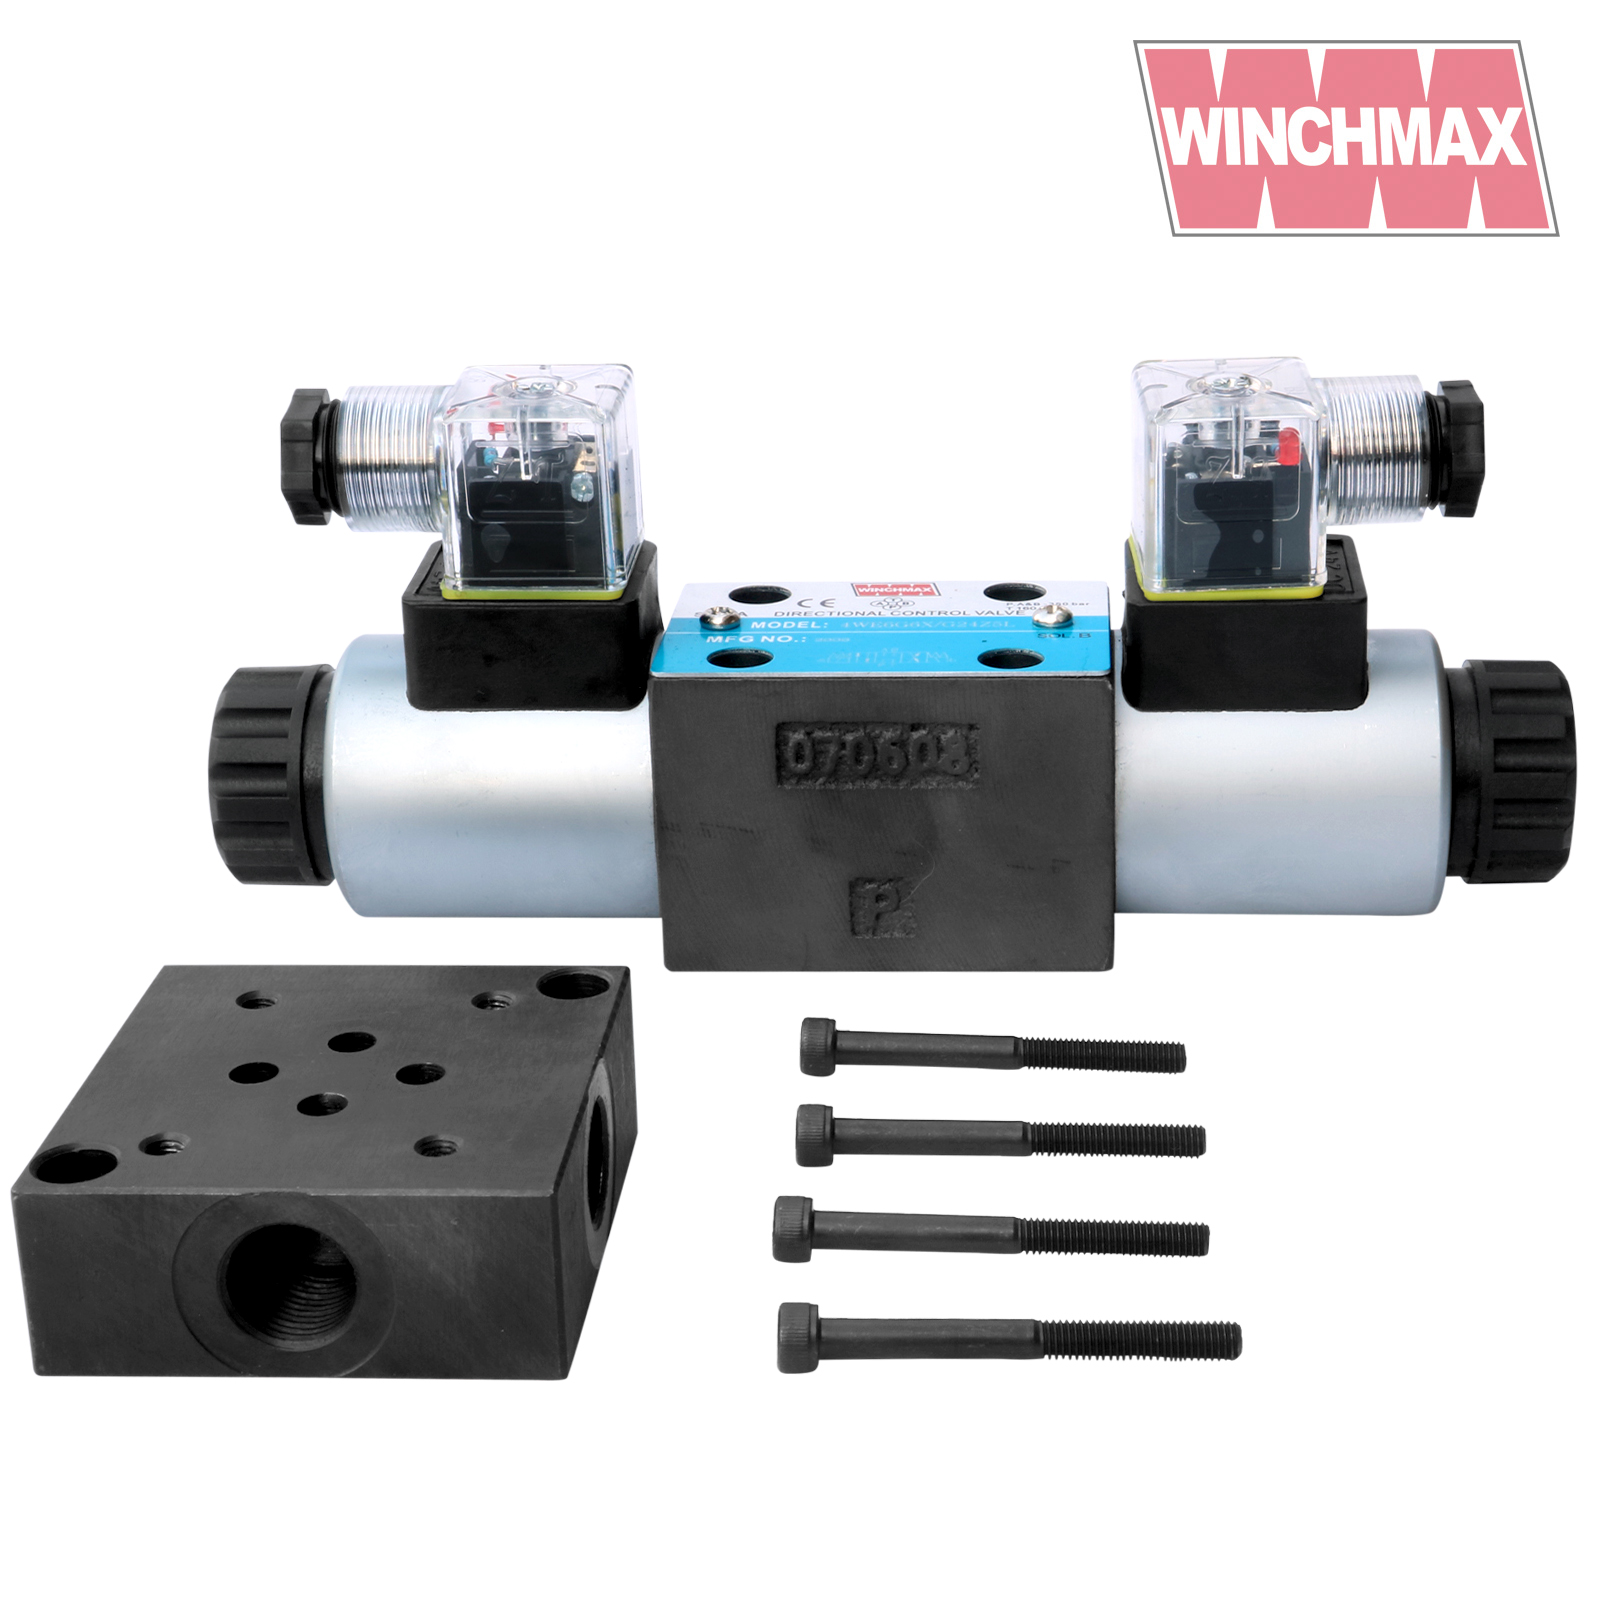 WINCHMAX CETOP3 Solenoid Valve and Manifold Subplate